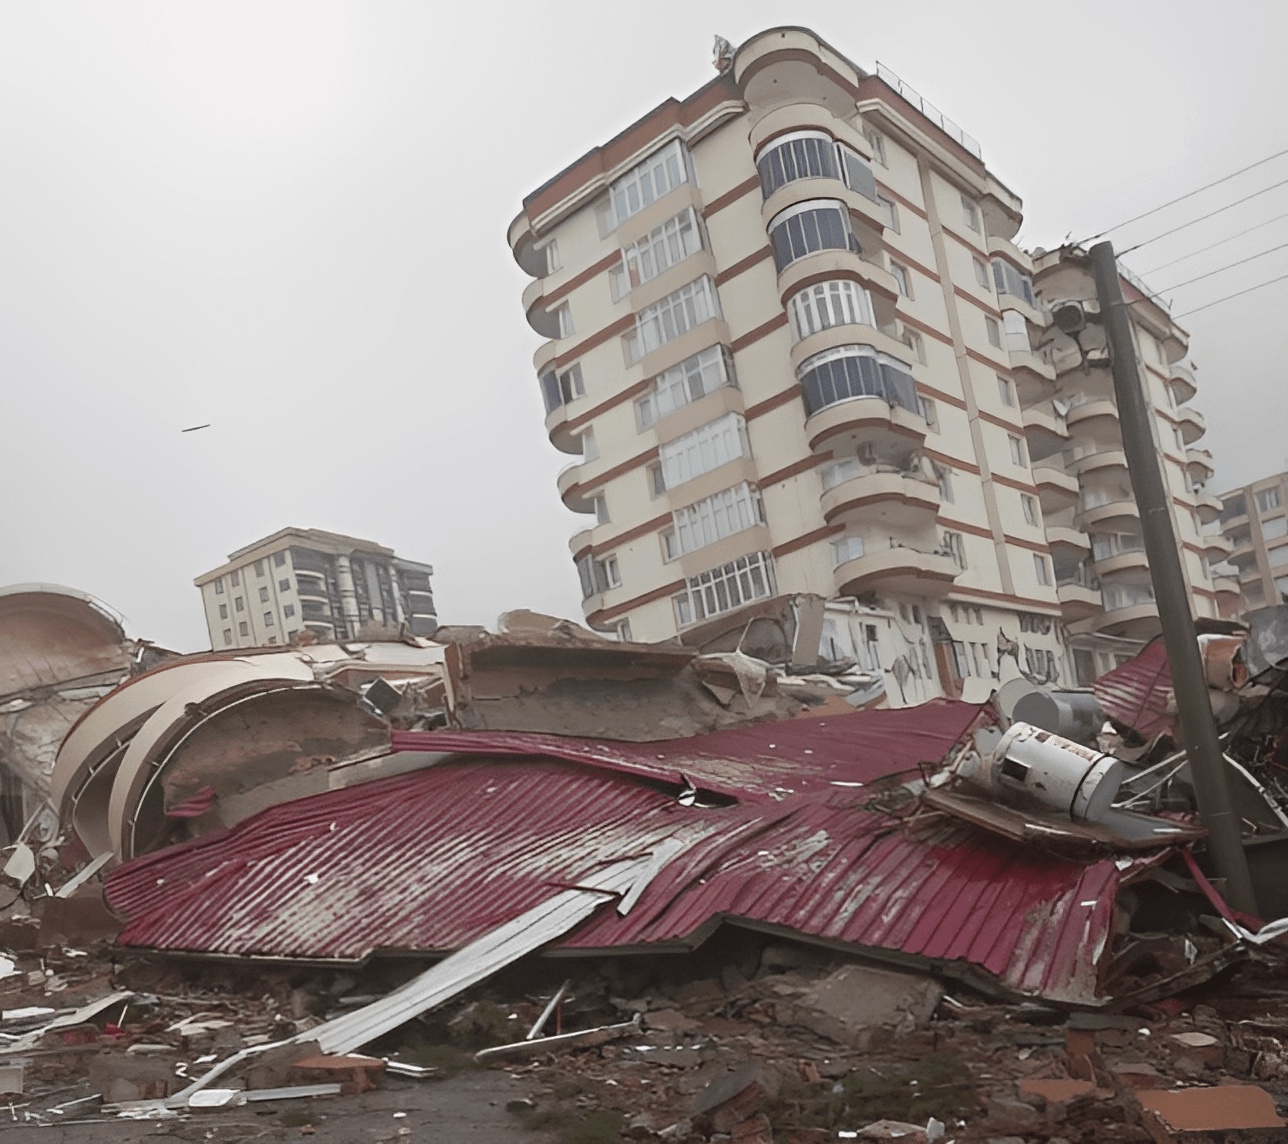 Disaster relief: Powerful earthquake strikes southern Turkey